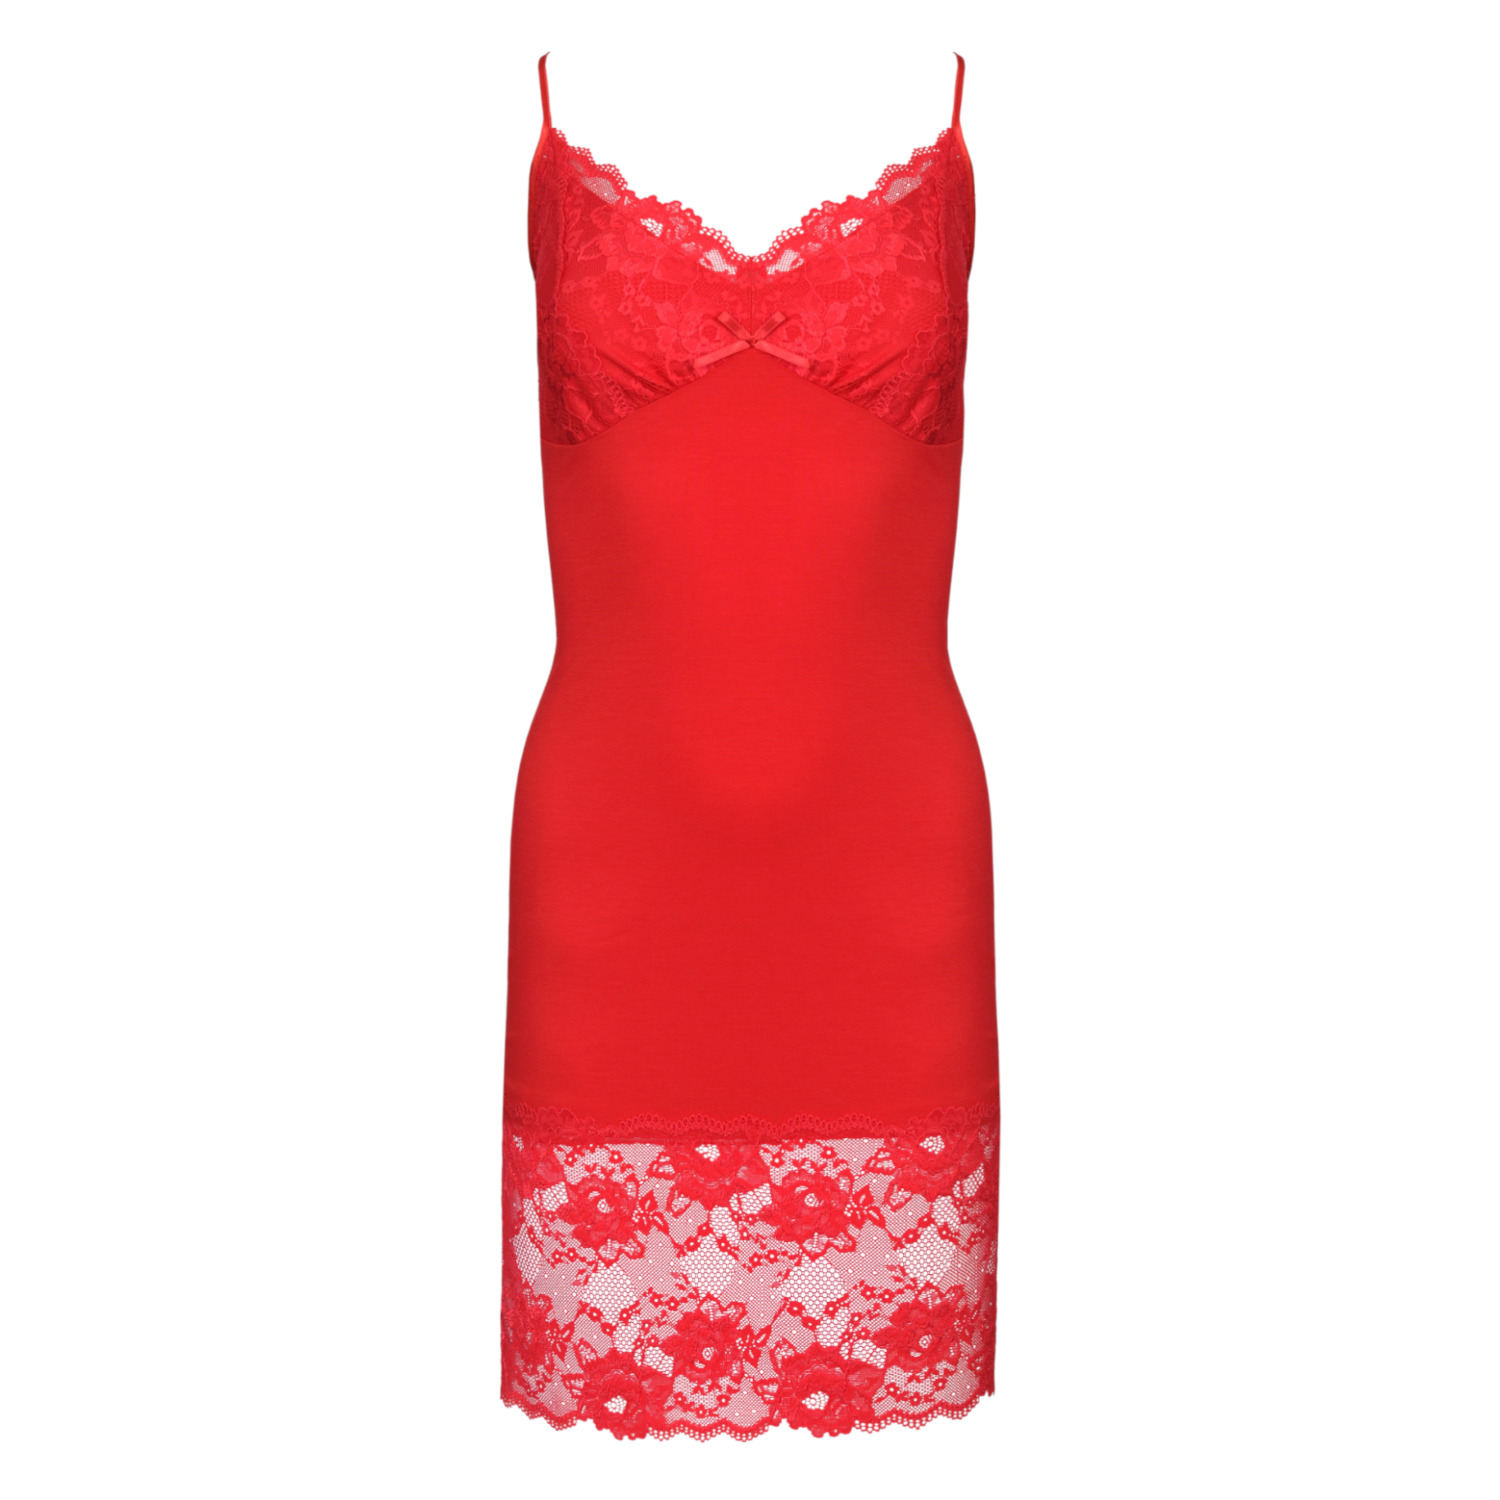 Women’s Classic Lace Chemise Nightdress - Red Large Oh!Zuza Night & Day